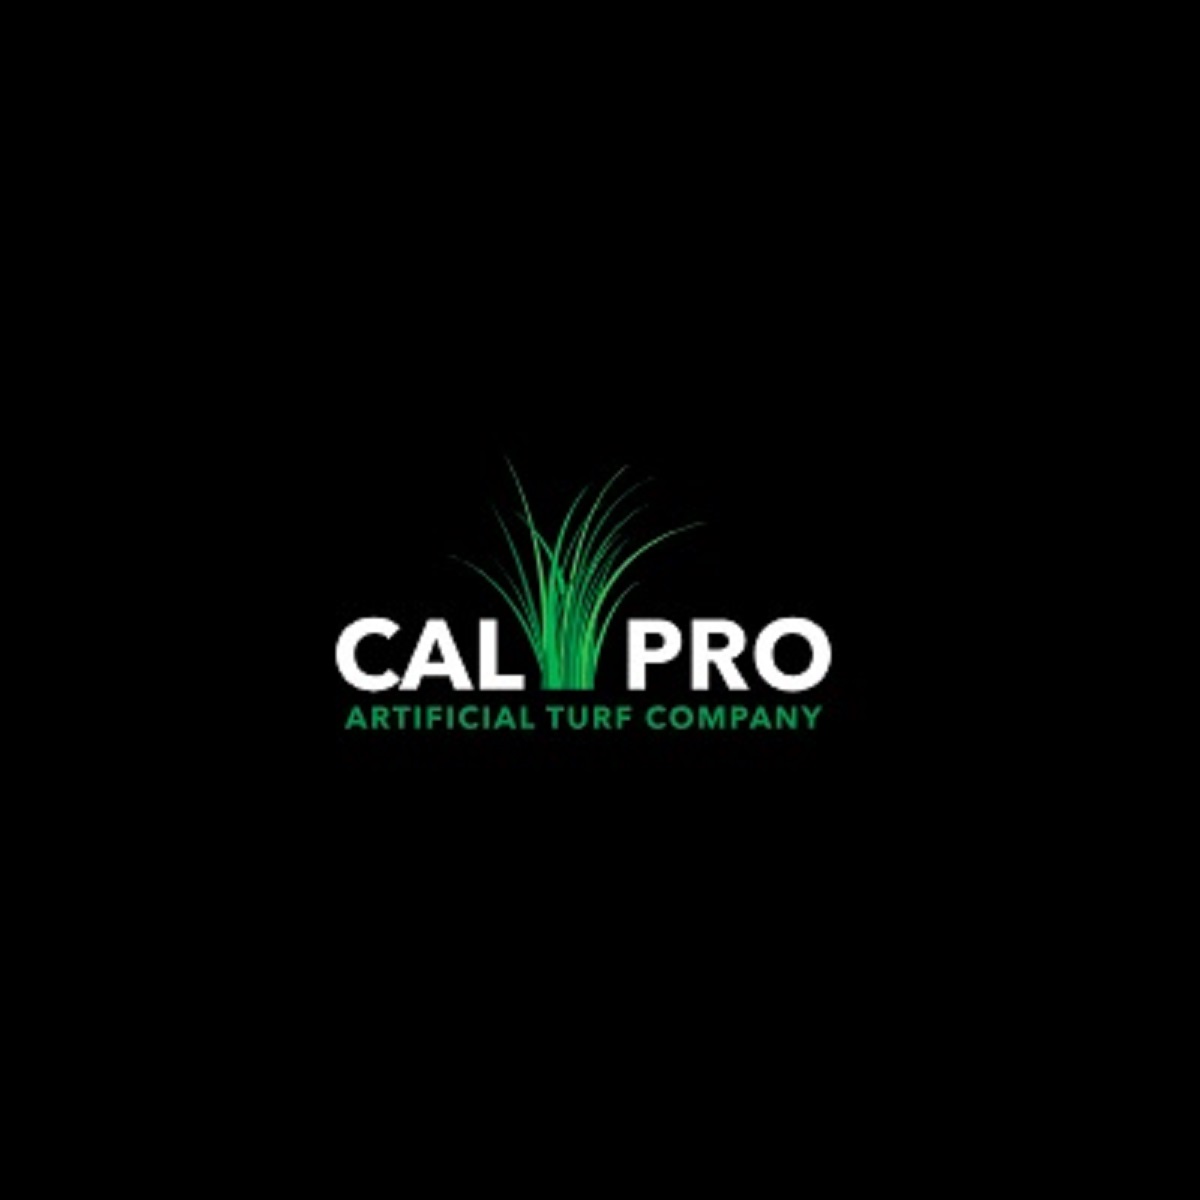 Cal Pro Artificial Turf Company Cover Image